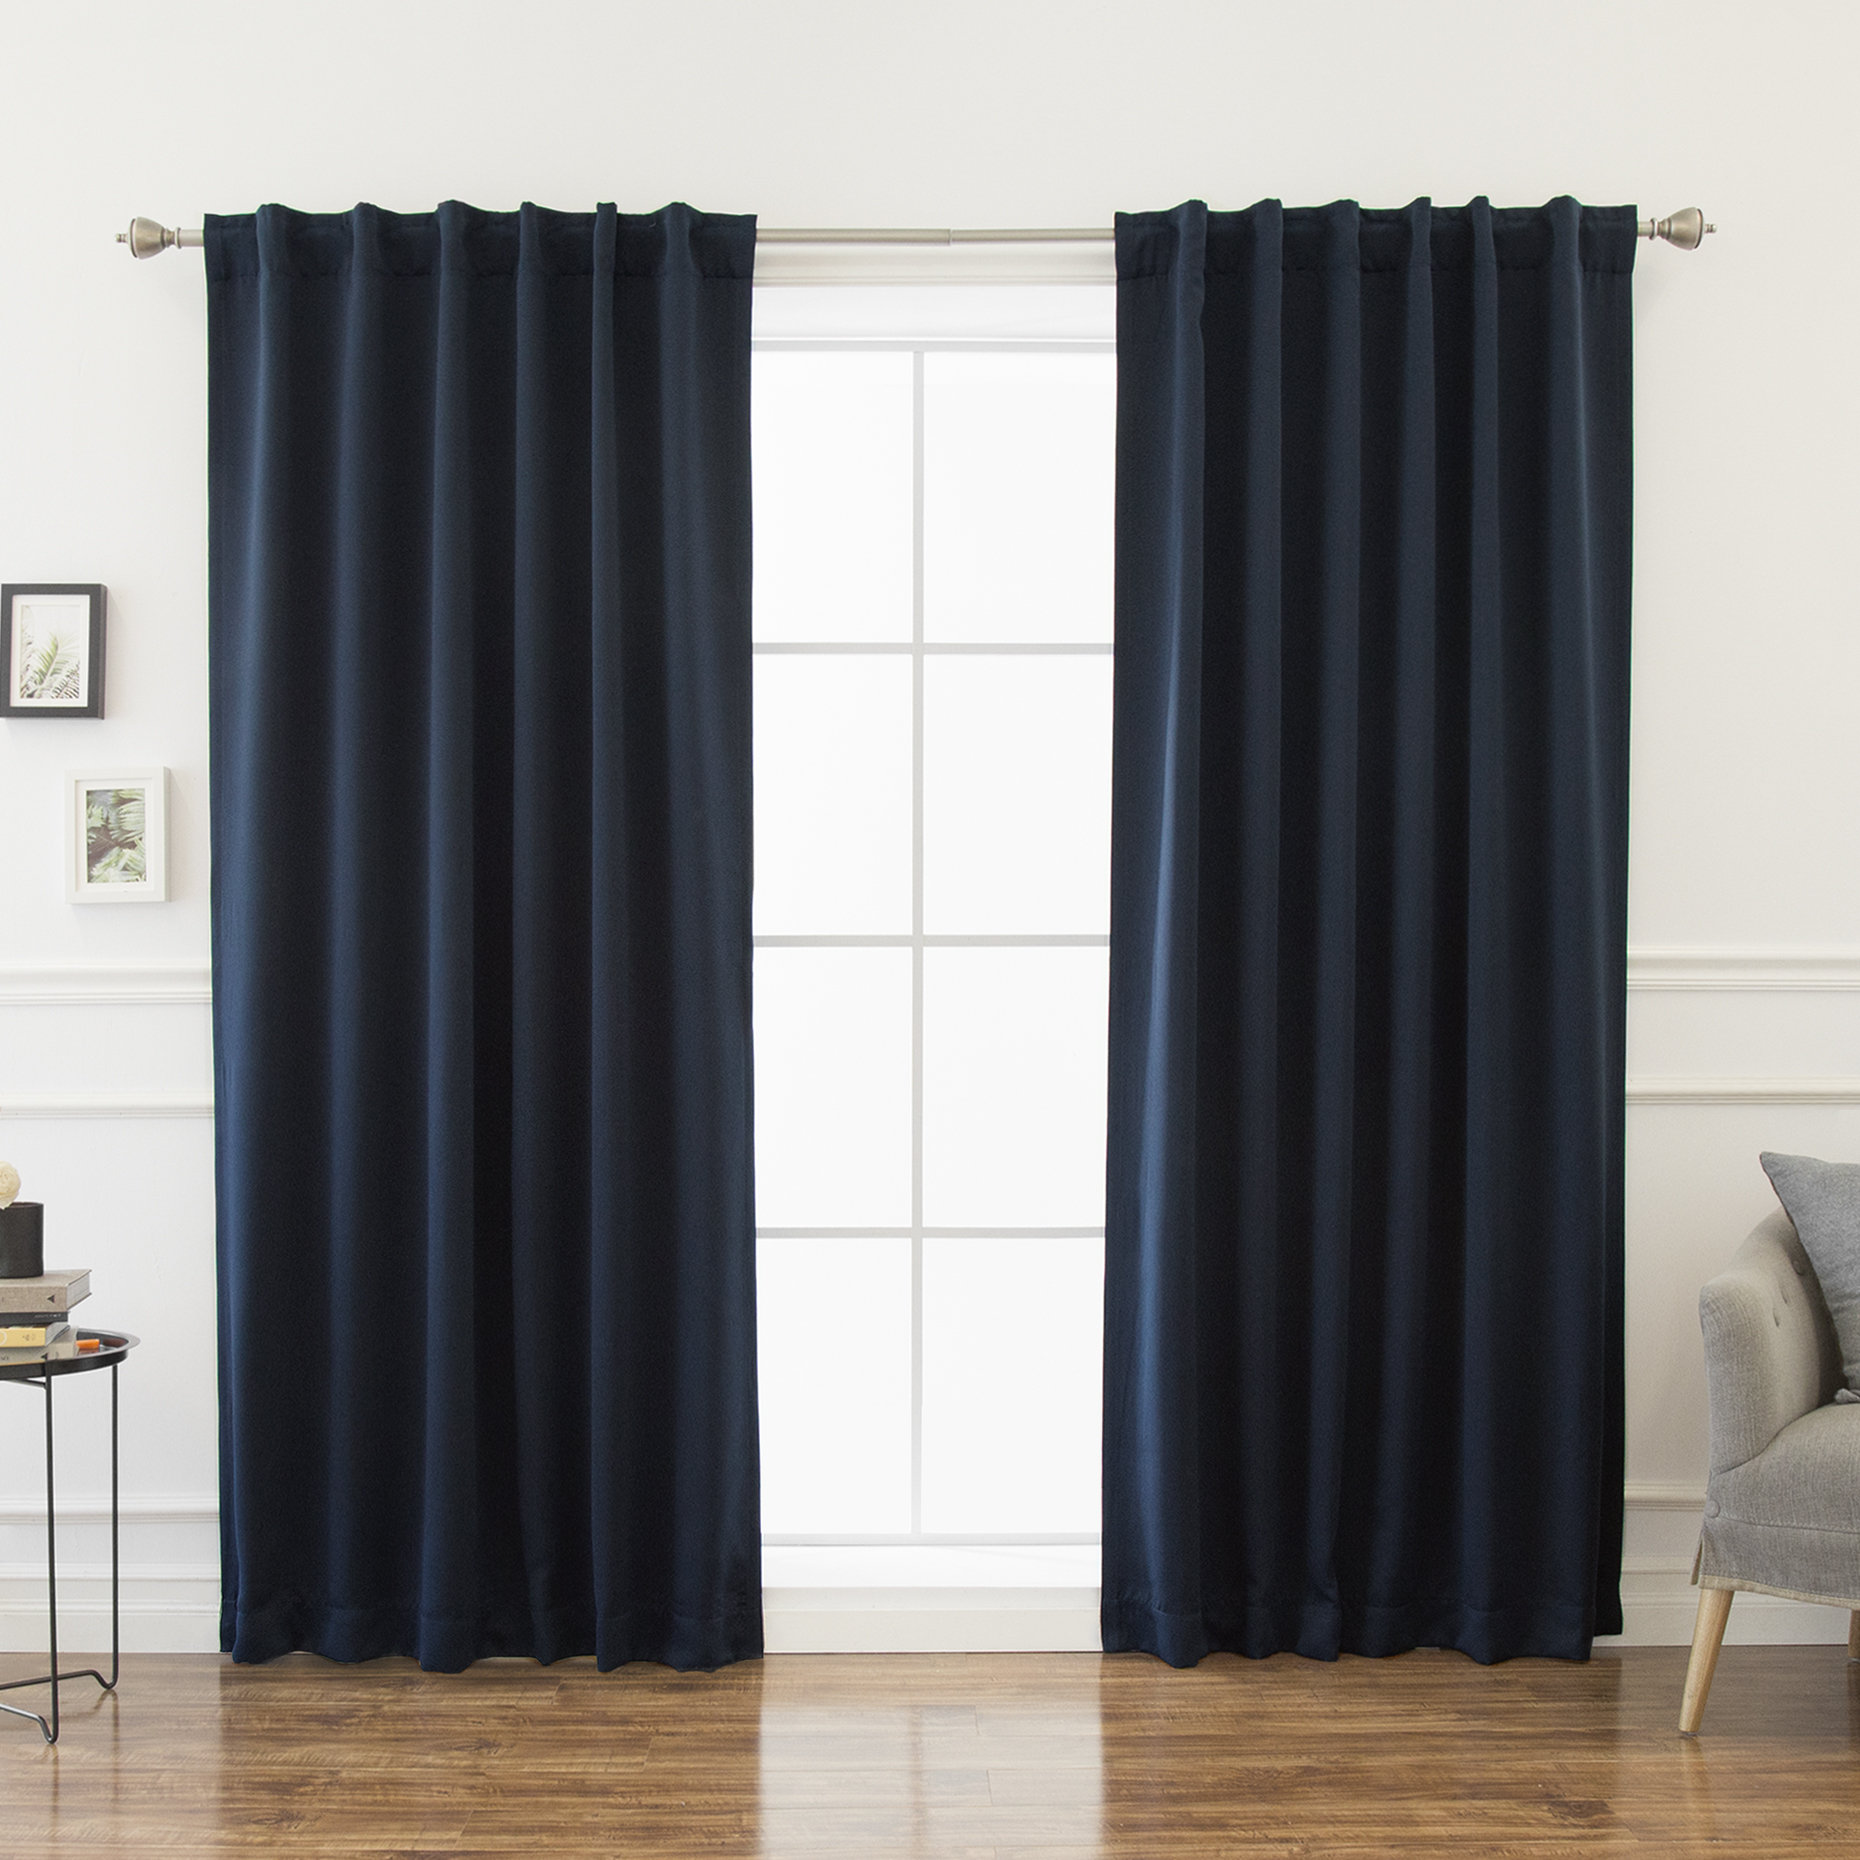 Natural Softline Home Fashions Bahamas 7 Series Window Curtain//Drape//Panel//Treatment Traditional Striped Design with Rod Pocket 50 x 84